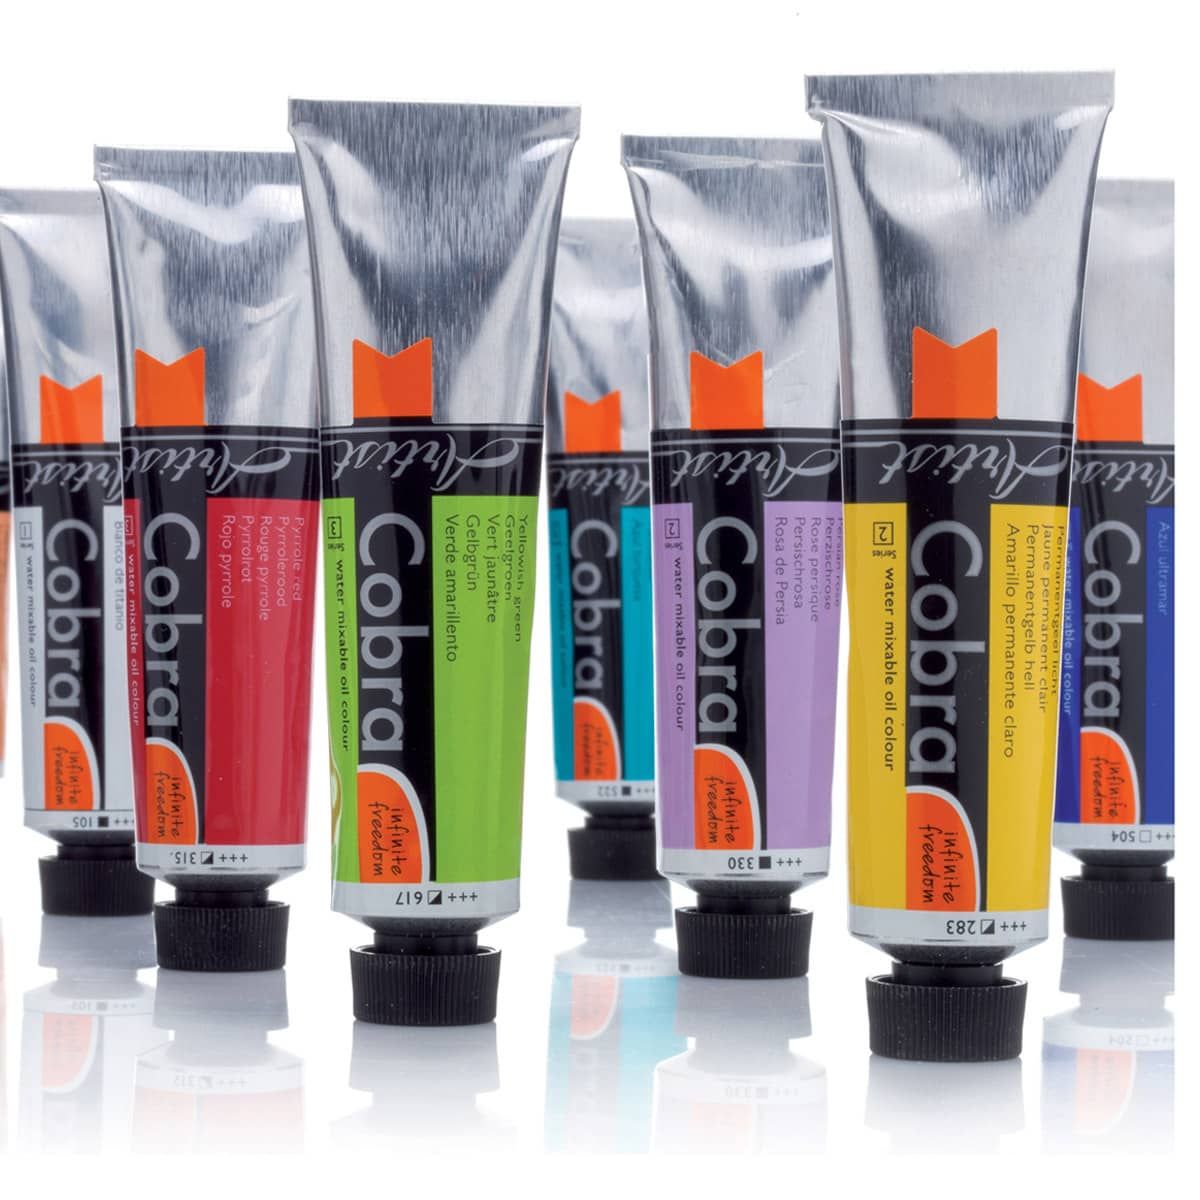 70 vivid colors available for Cobra Water-Mixable Oils